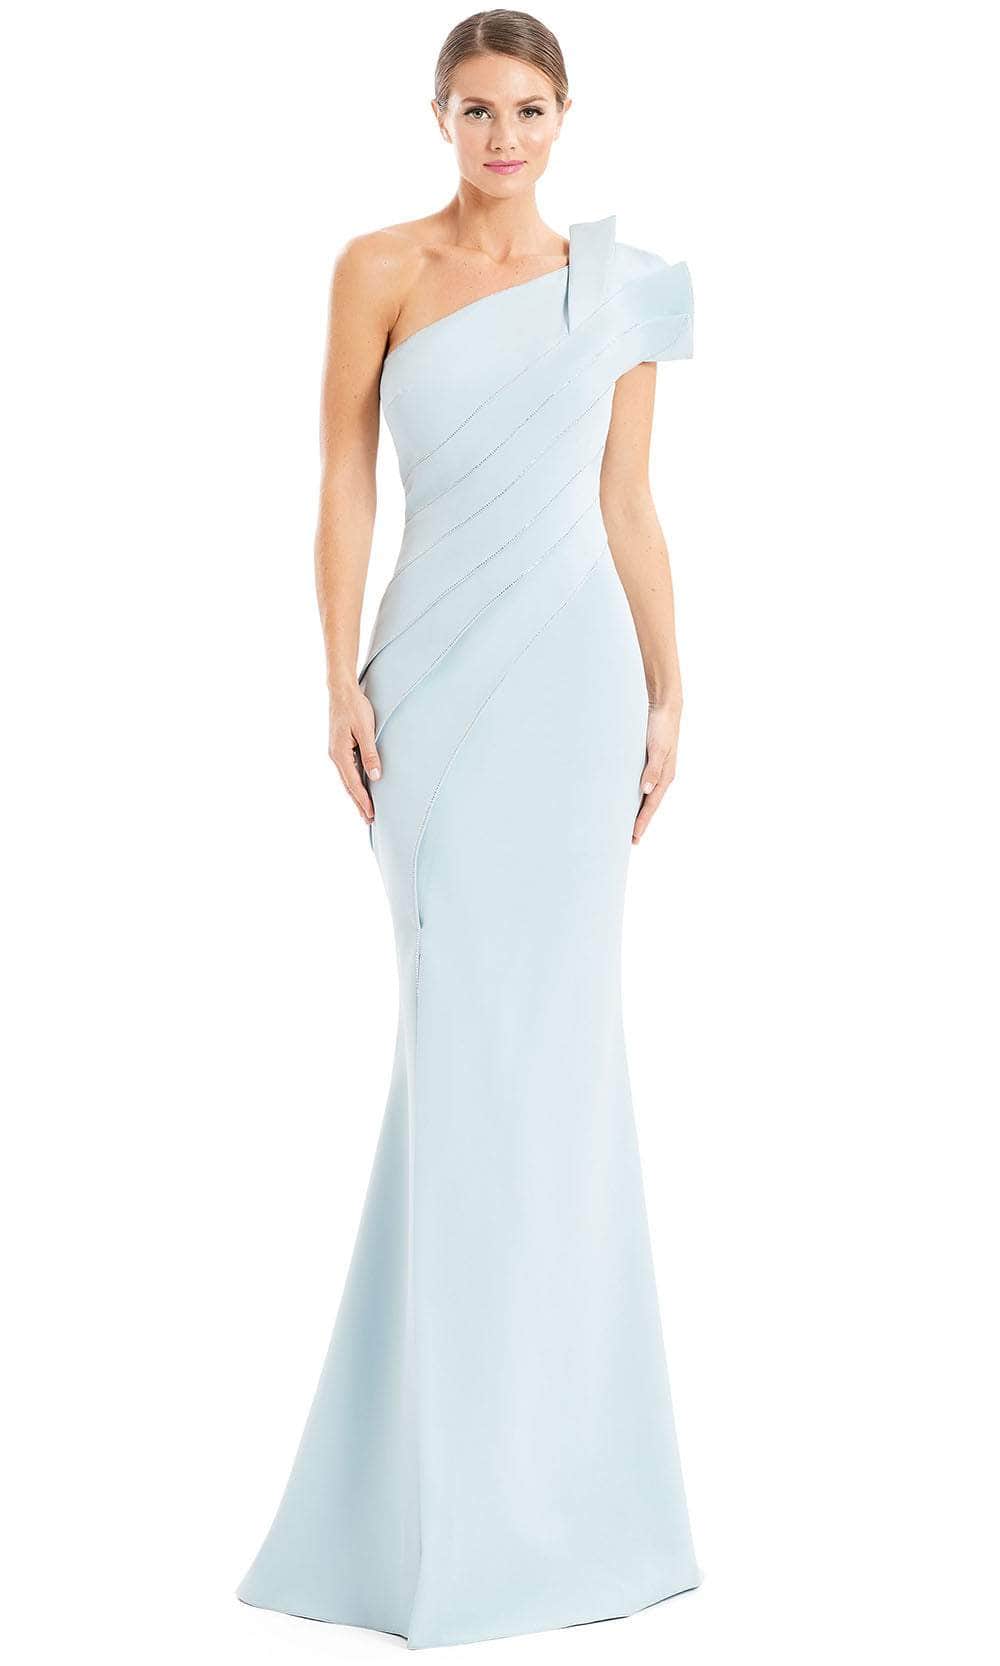 Alexander By Daymor 1671F22 - Pleated Asymmetric Neck Evening Gown Special Occasion Dress